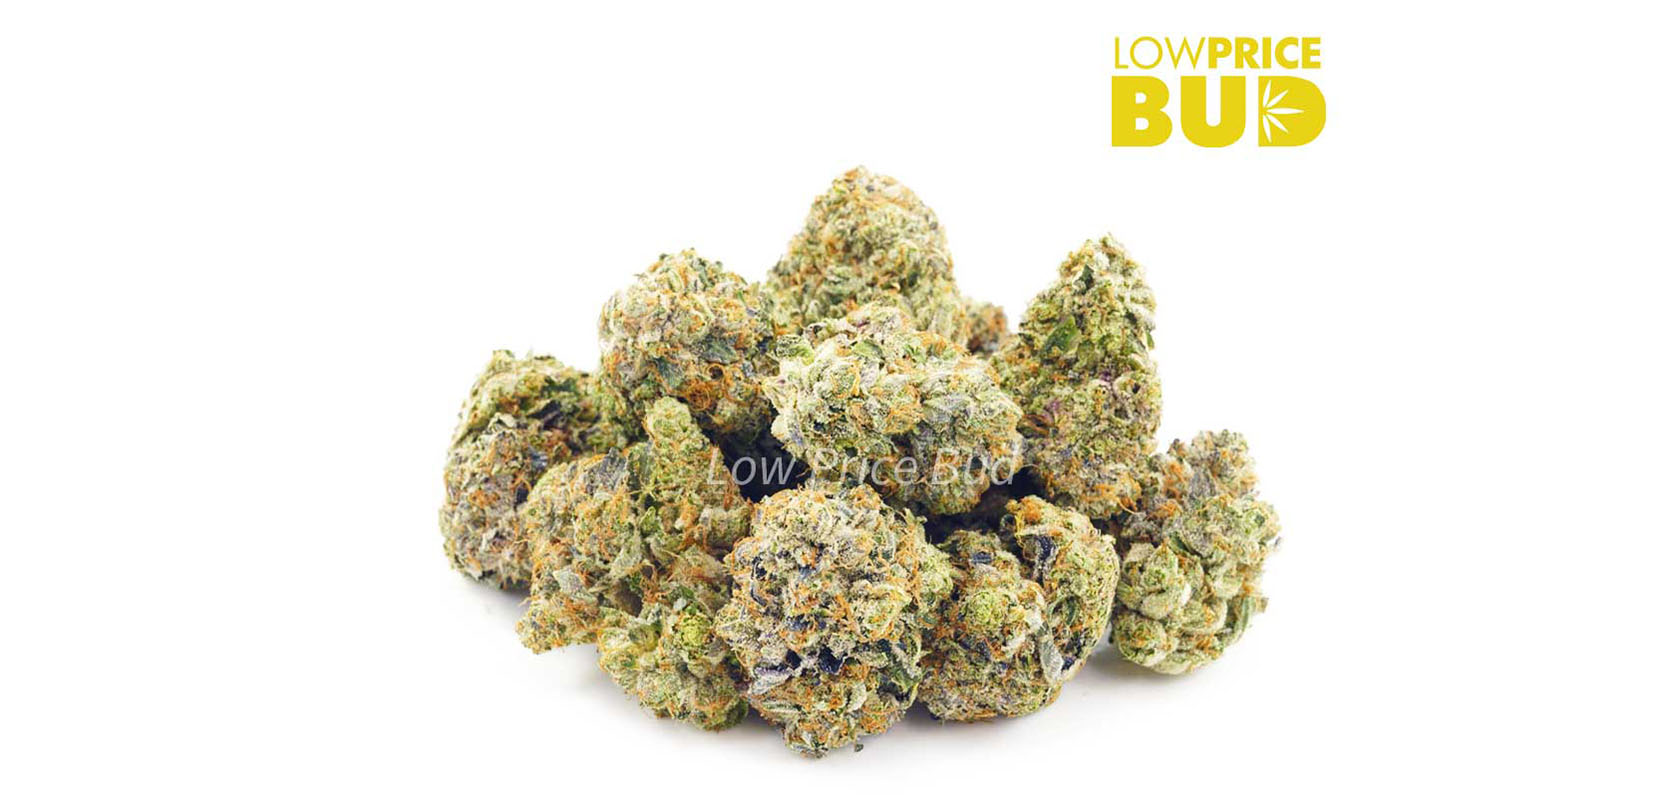 Photo of candy land weed from online dispensary for mail order marijuana low price bud.